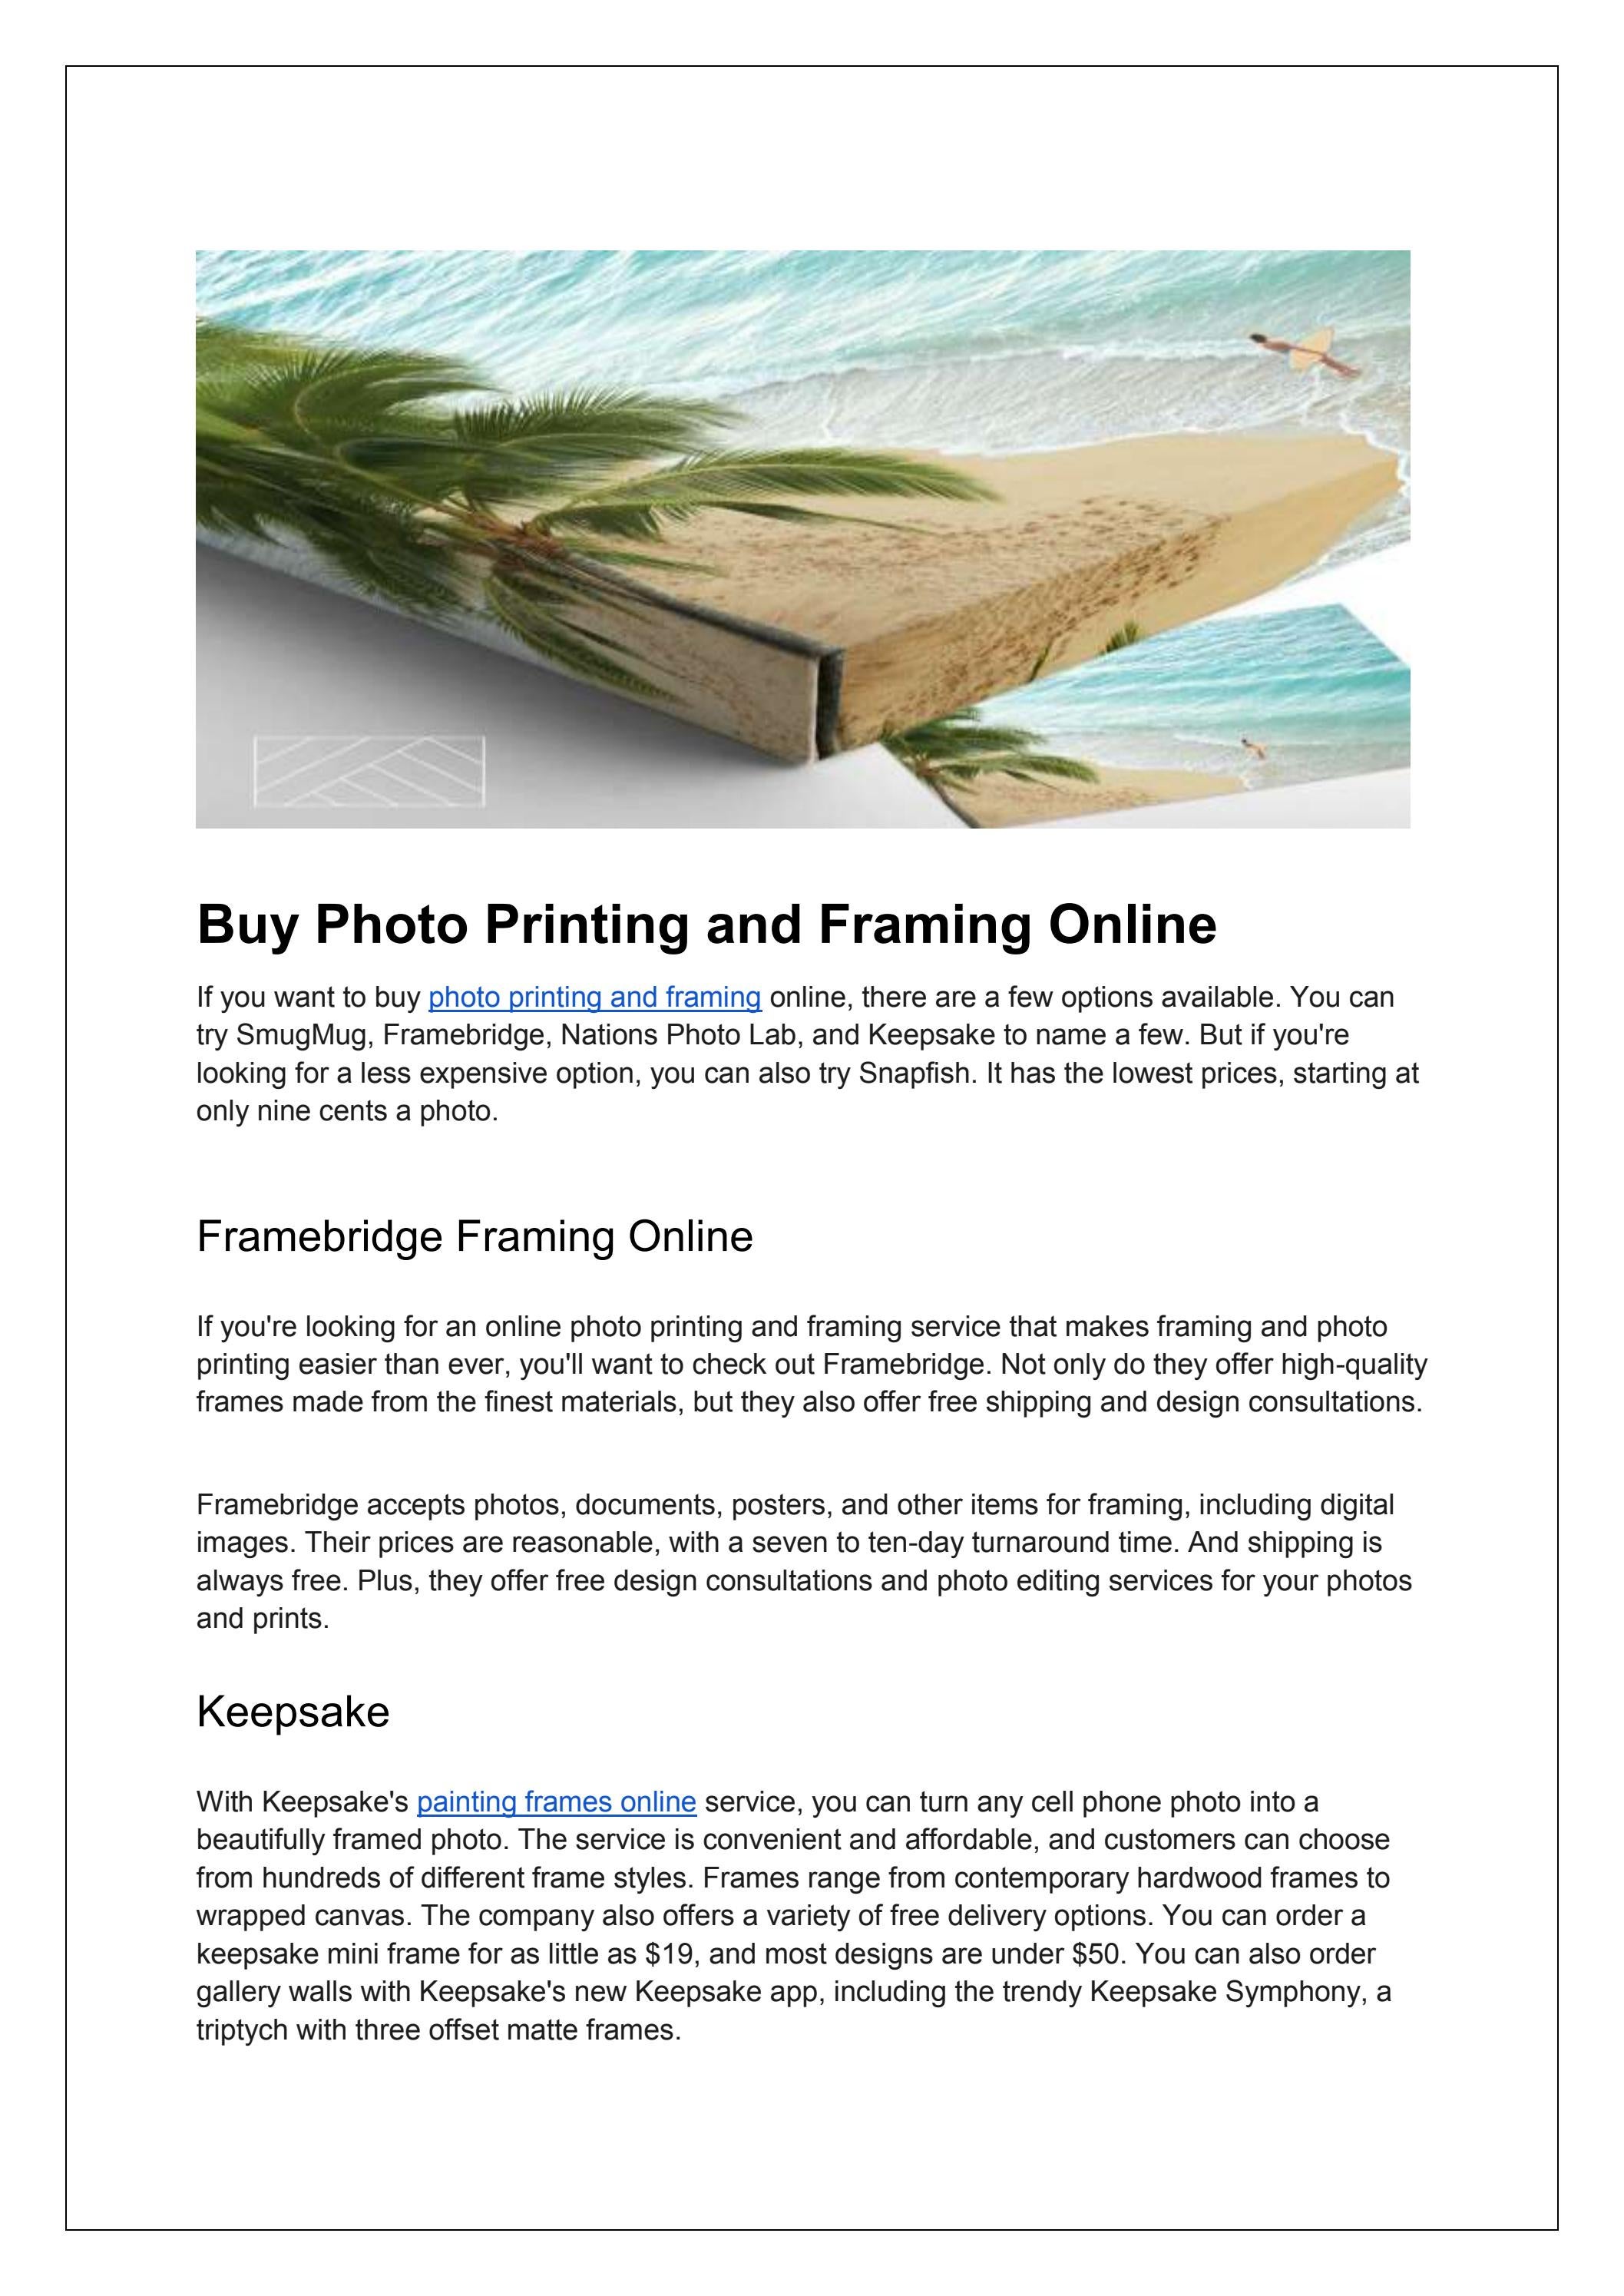 Buy Photo Printing and Framing Online